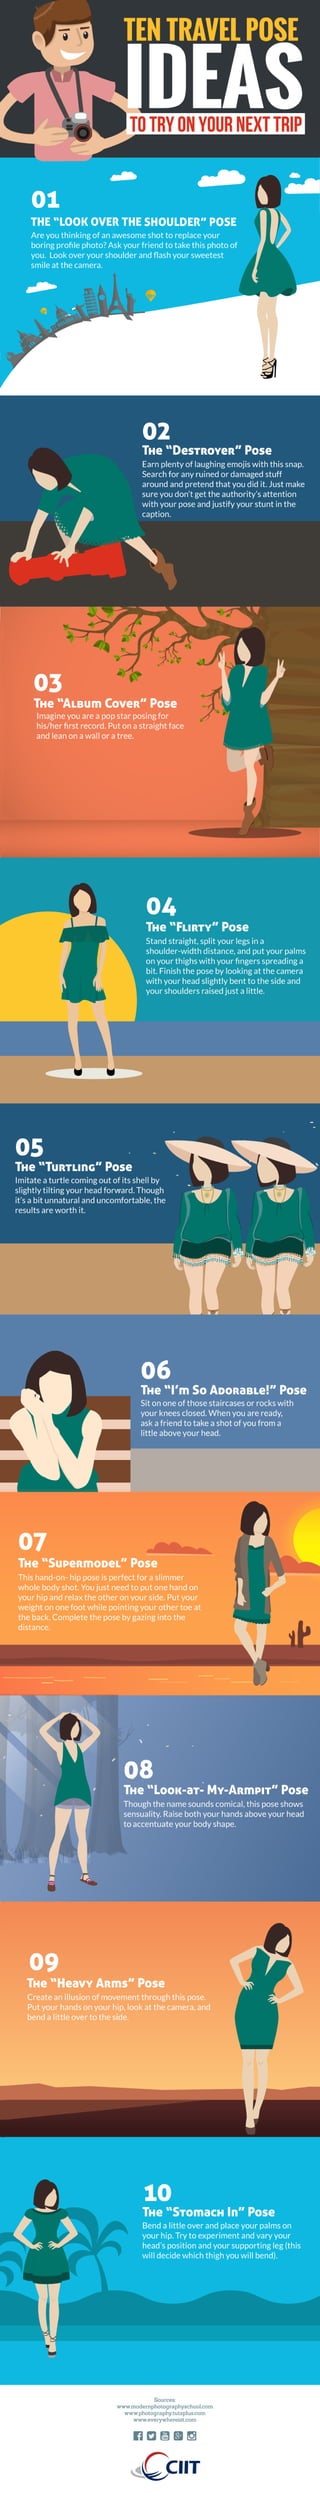 Travel Pose Ideas You Can Try on Your Next Trip [Infographic]